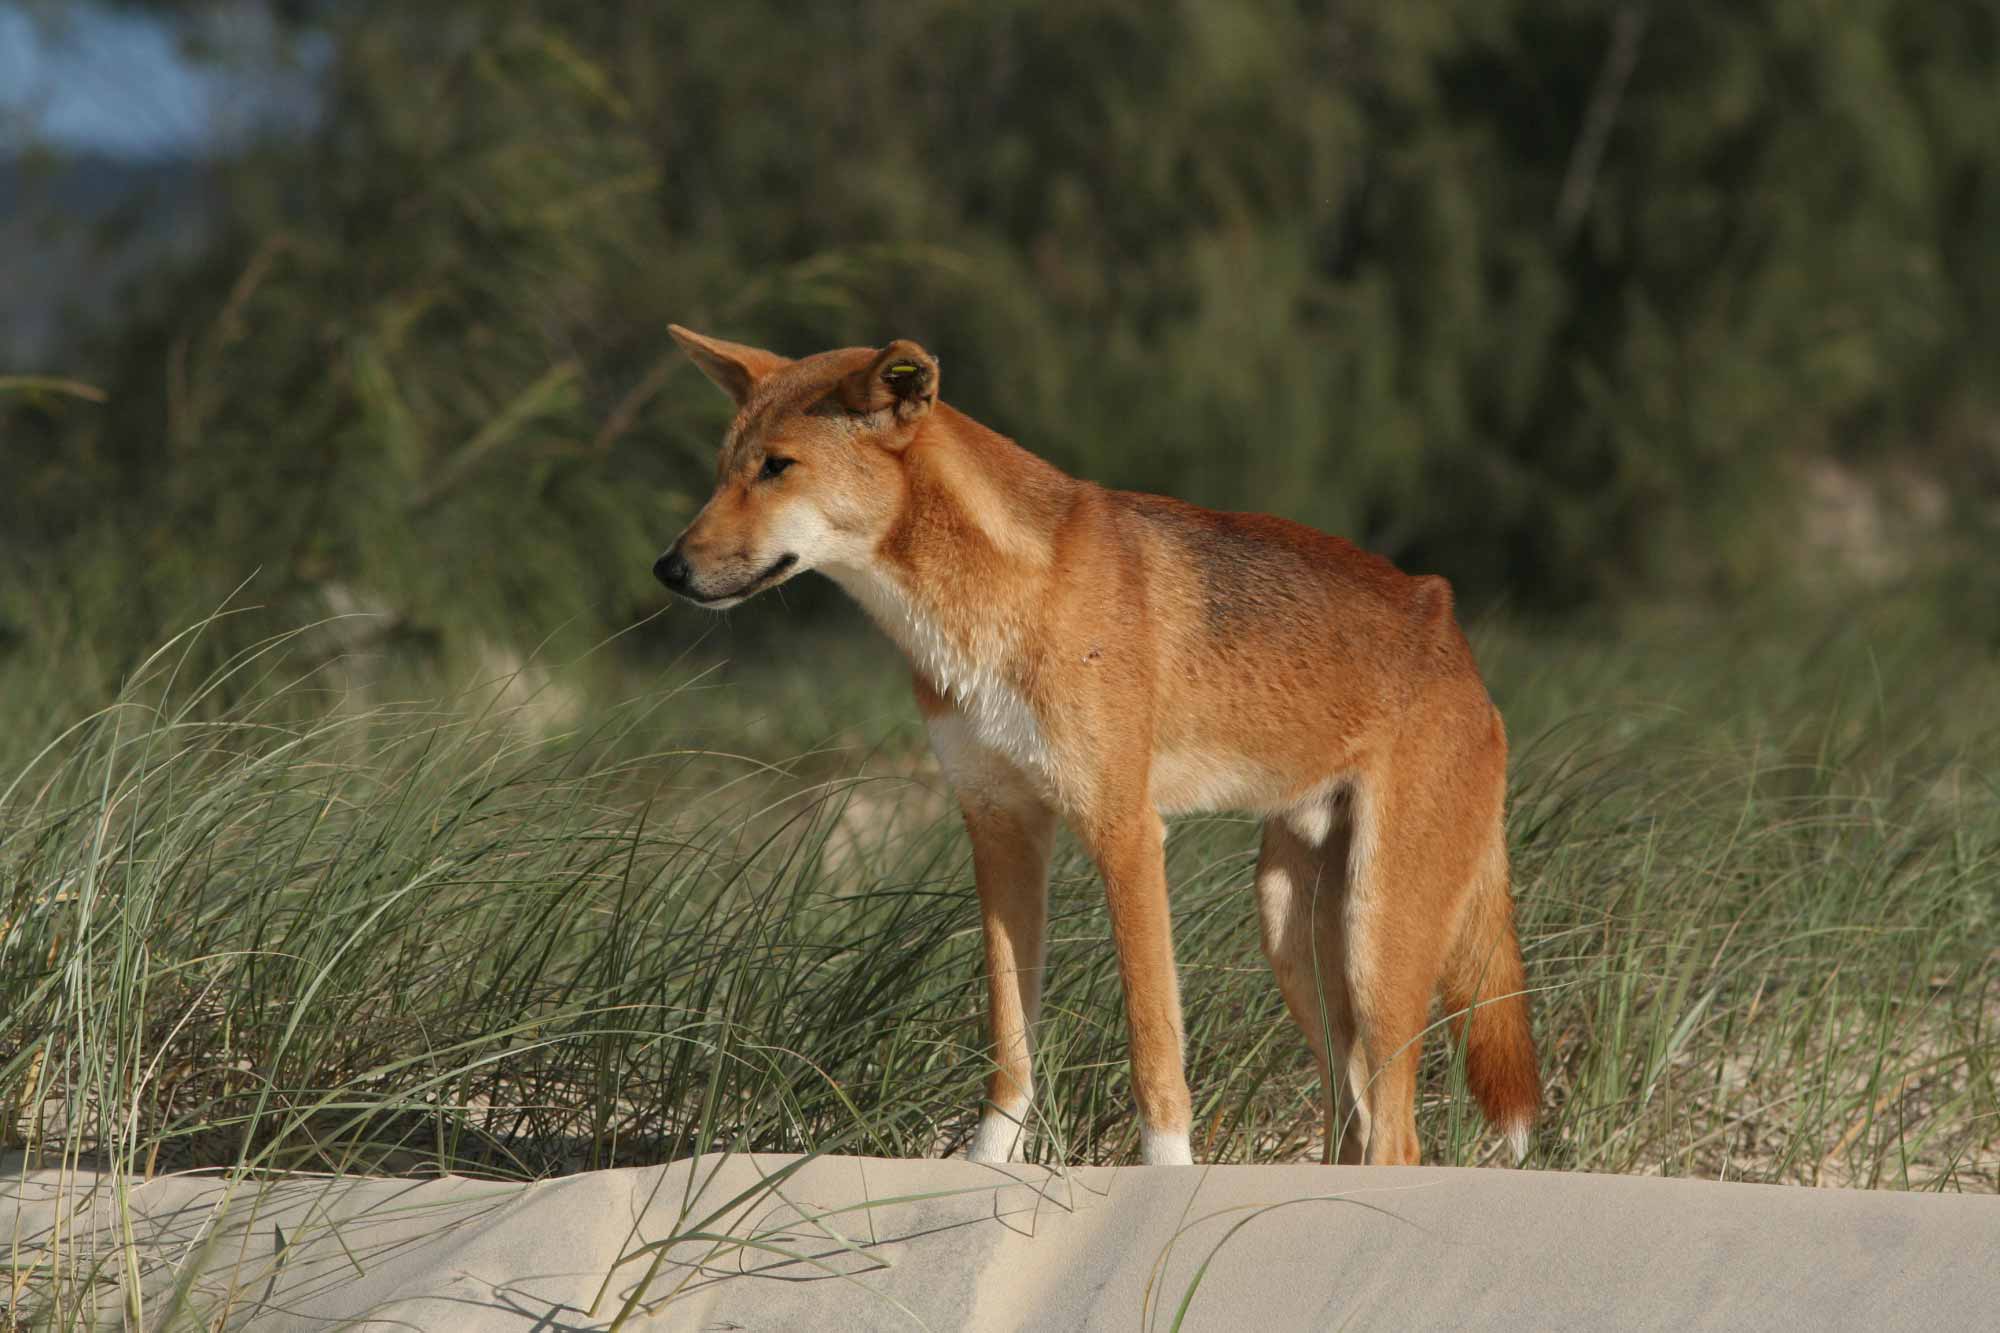 Photograph of dingo looking out from grass-covered sand.